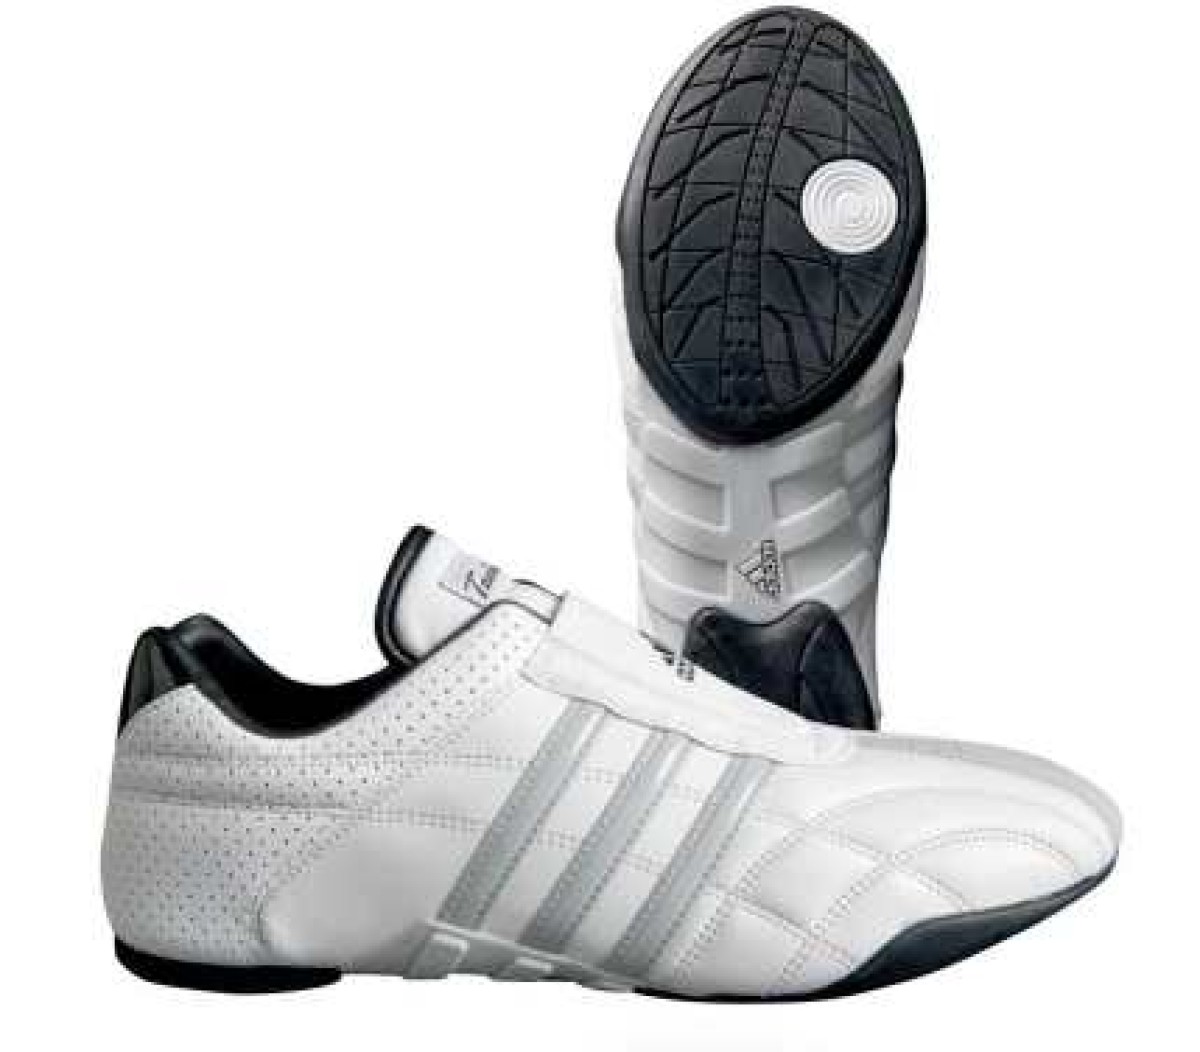 Adidas shoe Adilux white with silver 